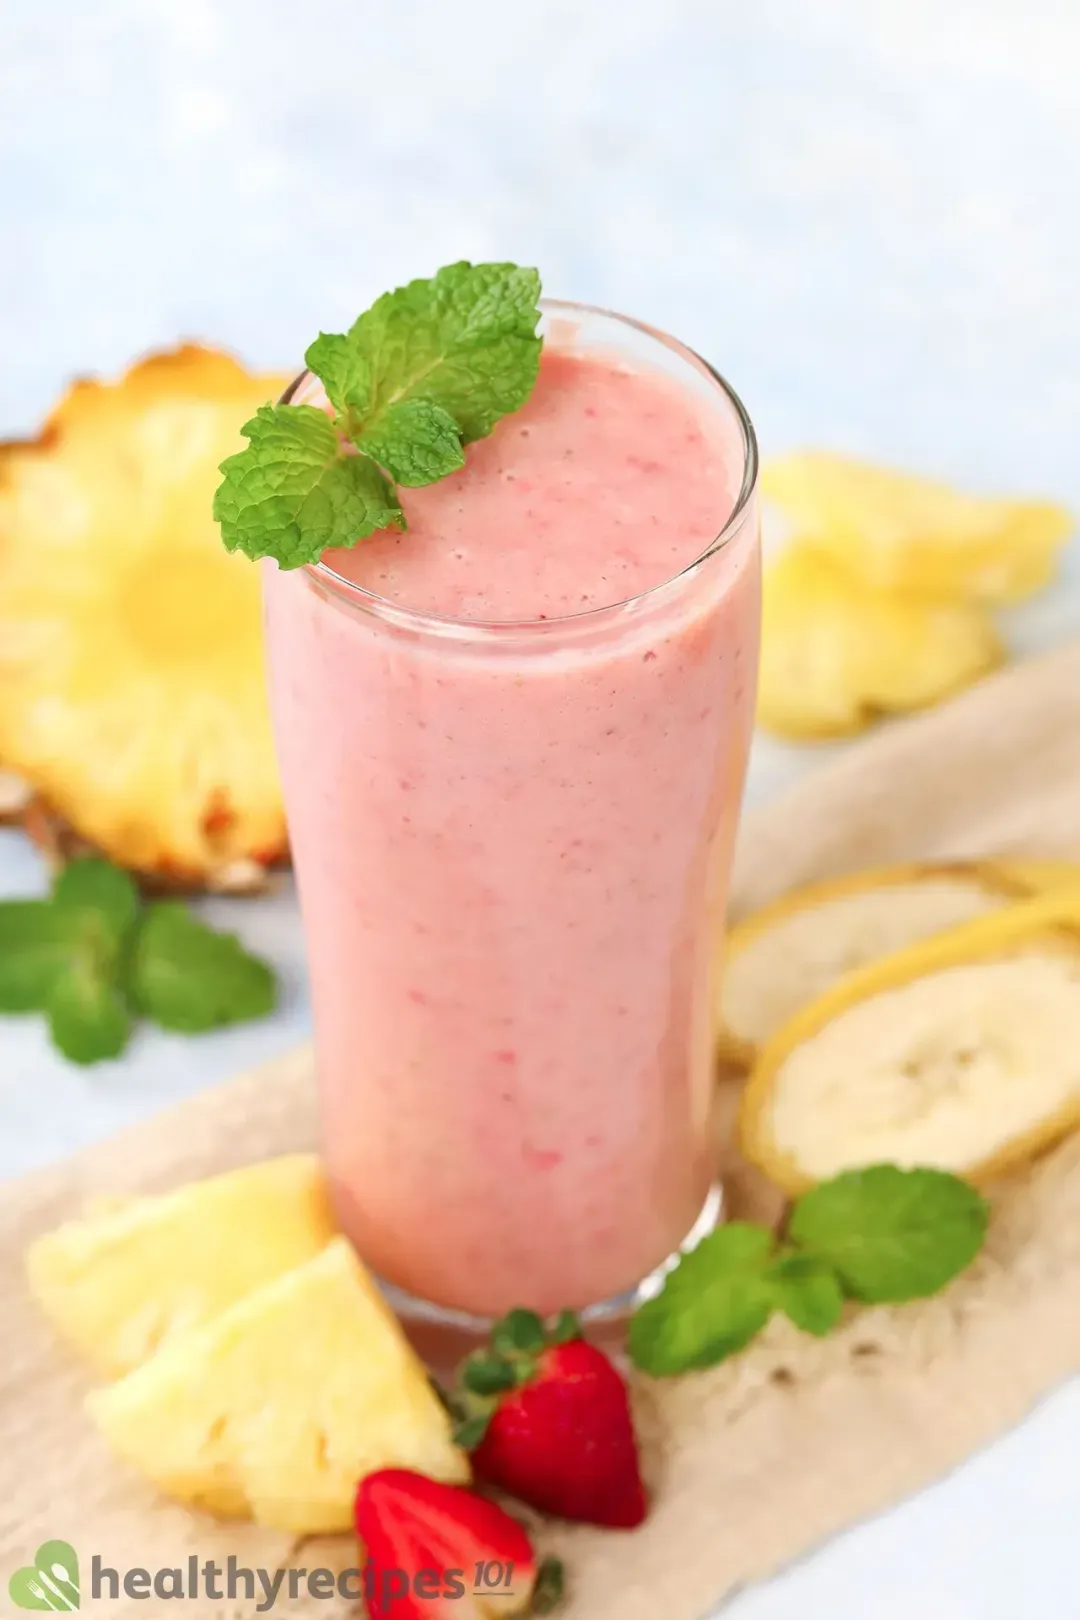 Is Pineapple Strawberry Banana Smoothie Healthy